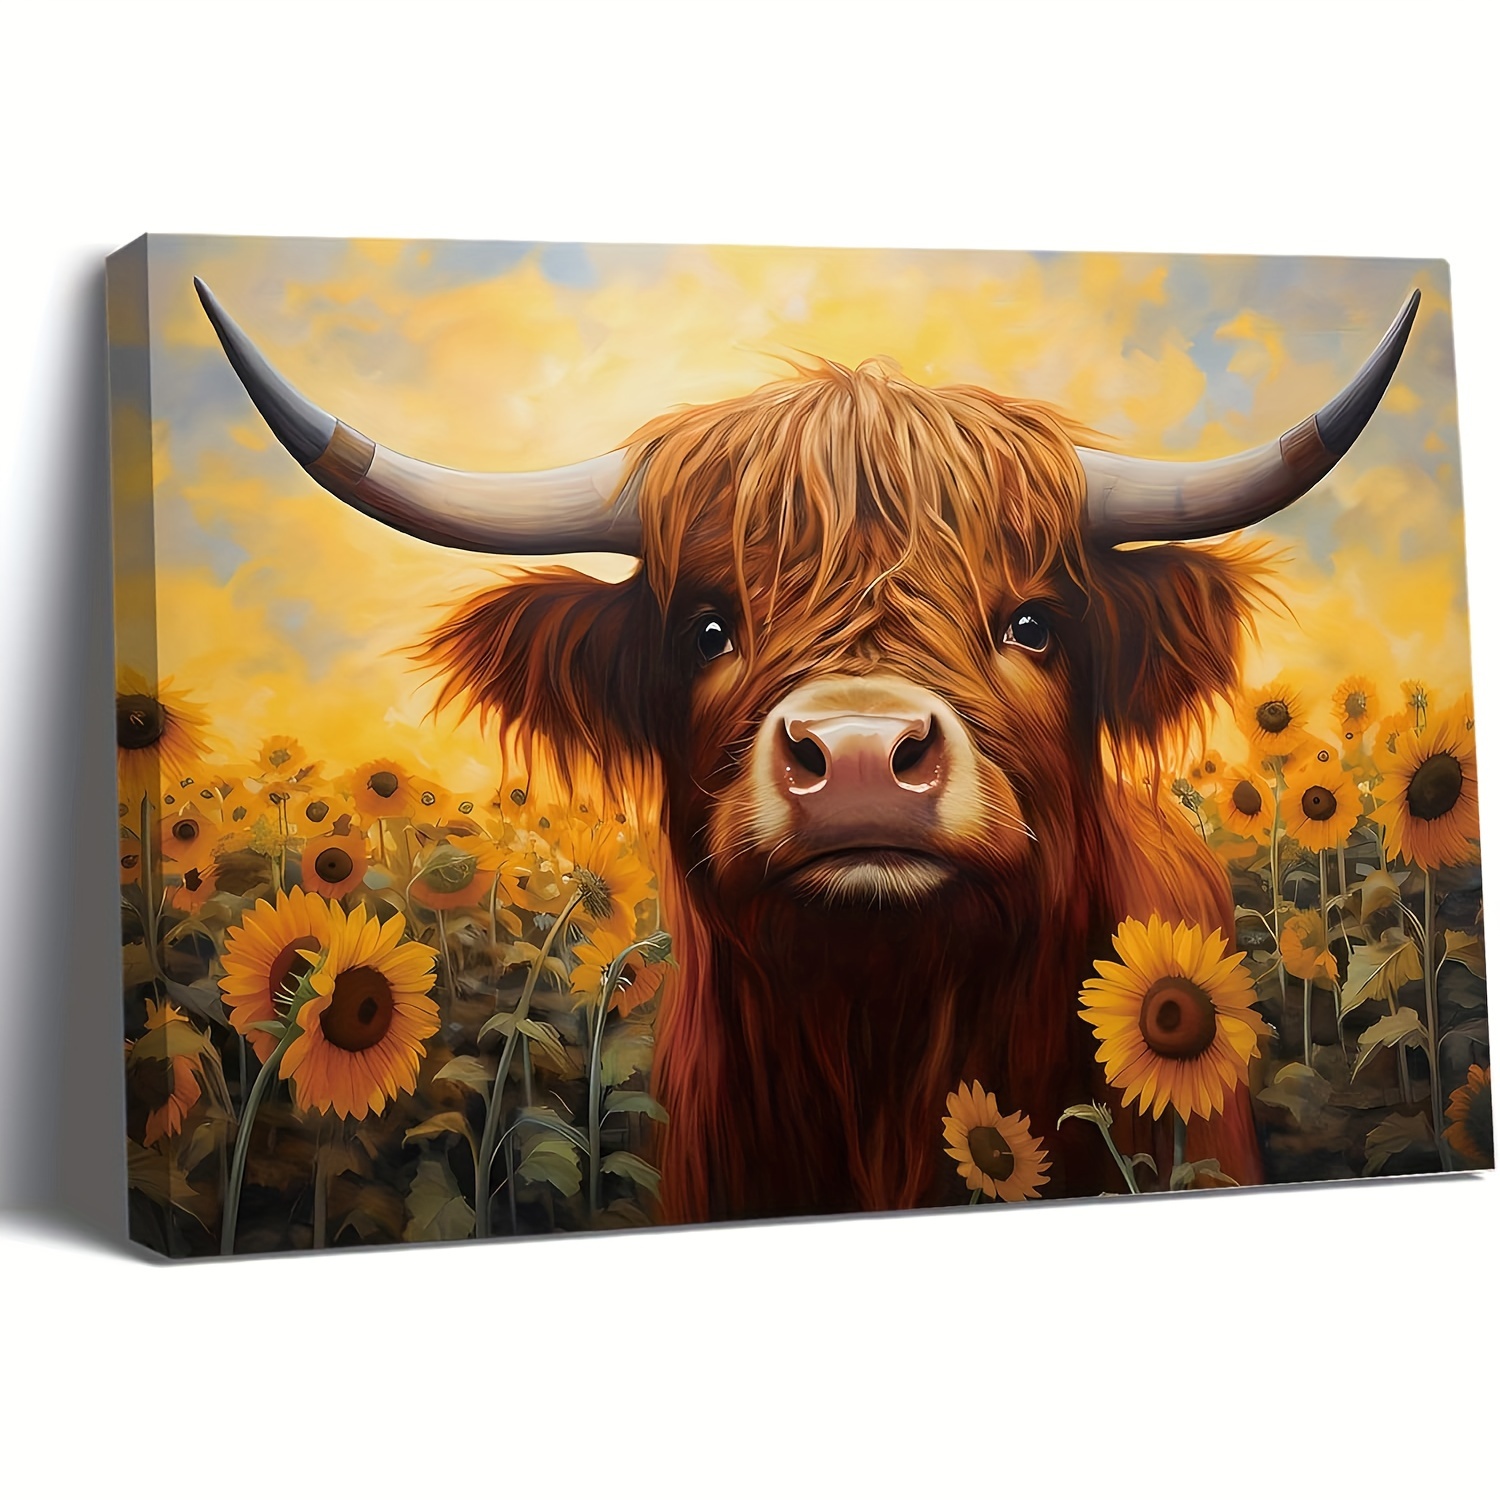 

1pc, Highland Cow And Sunflower Sunset Canvas Print Warm Soft Colorful Wall Art Living Room Bedroom Home Office Decor (sunflower,12 X 18 Inches)